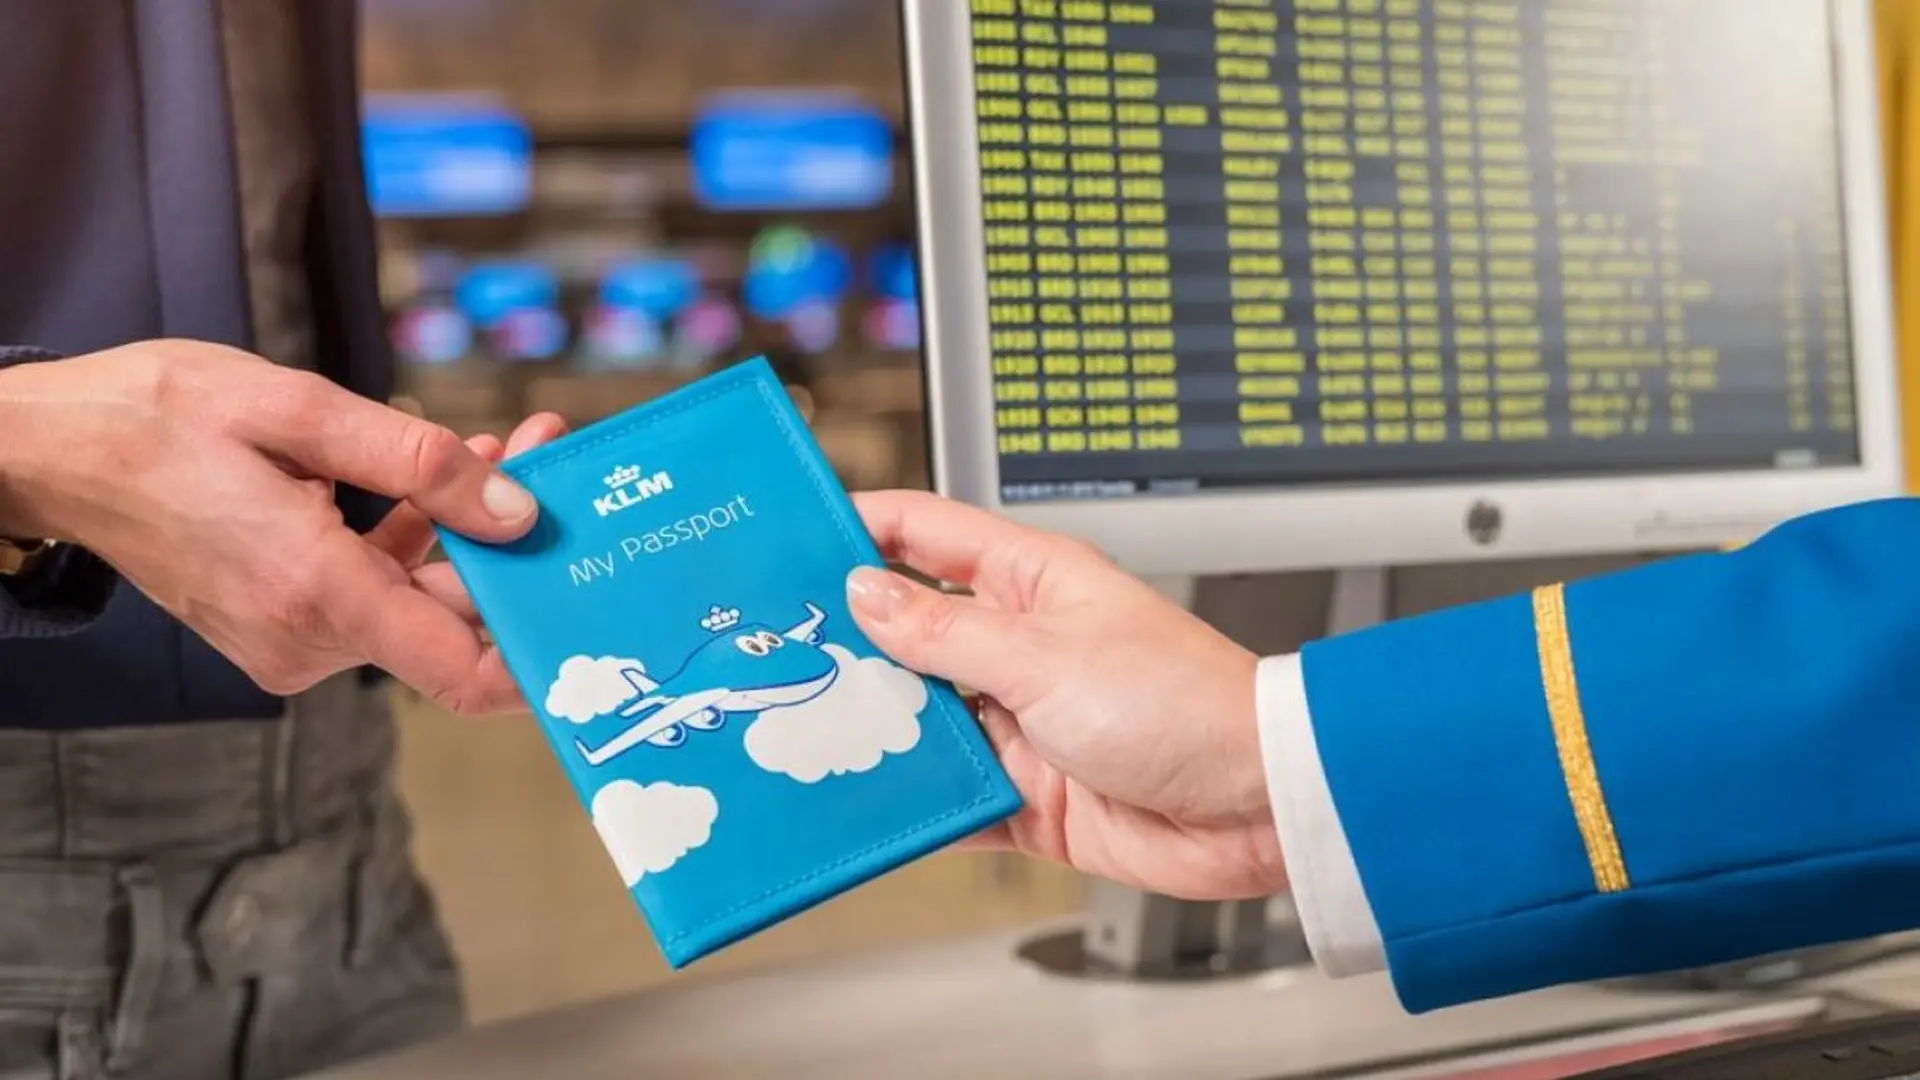 KLM passport cover for kids